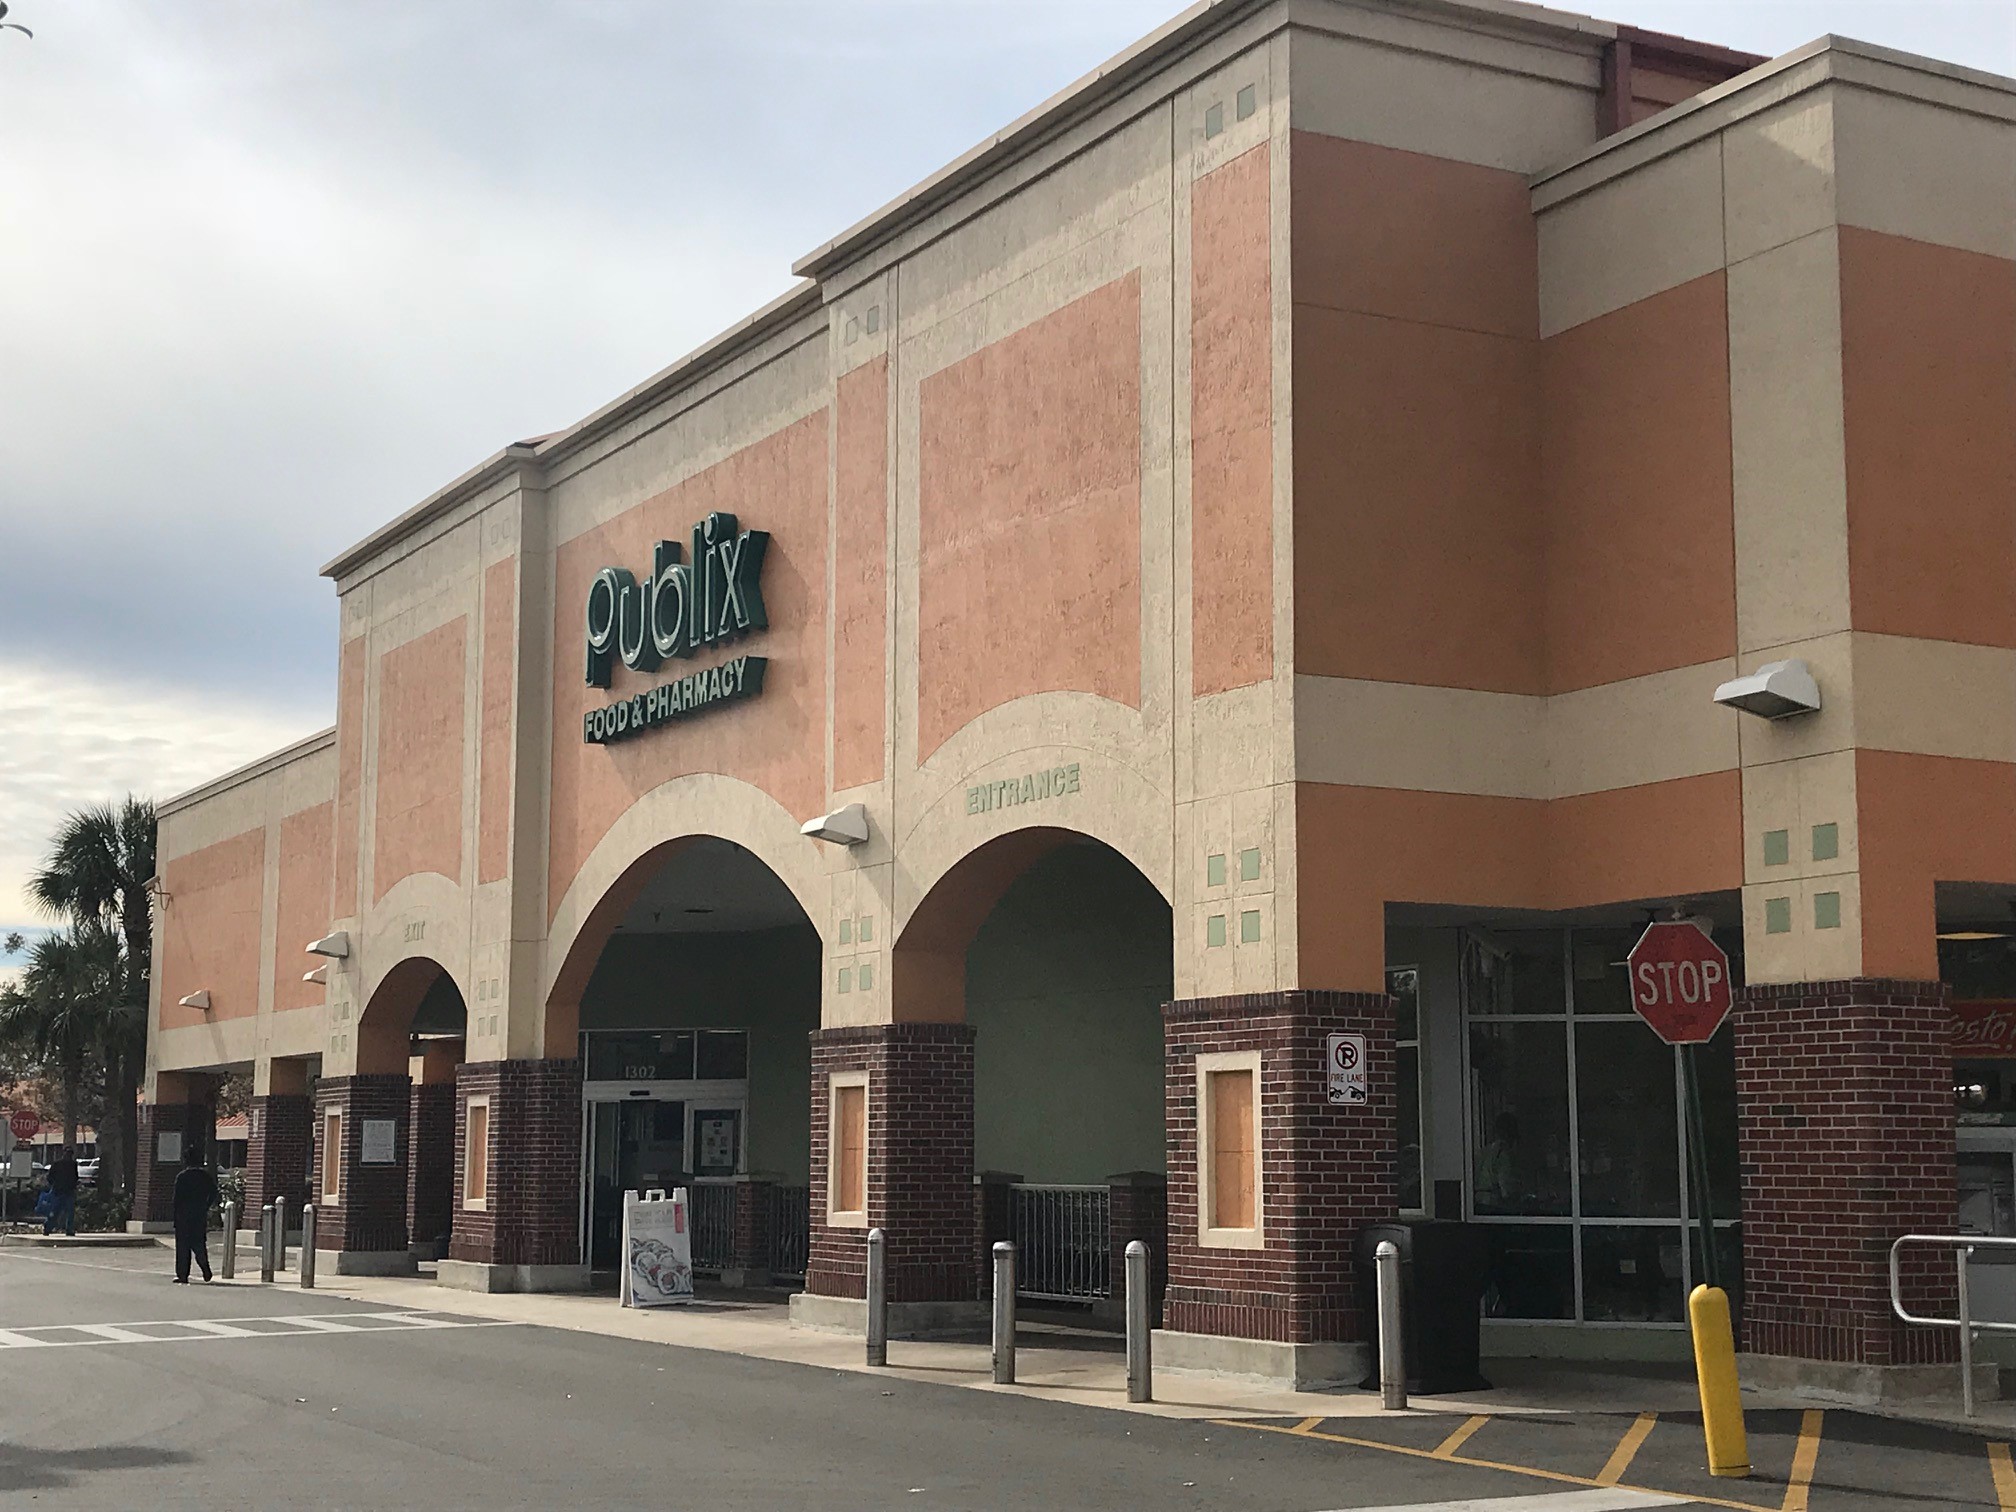 Sembler, Forge Announce Retail Center Acquisition in Gainesville